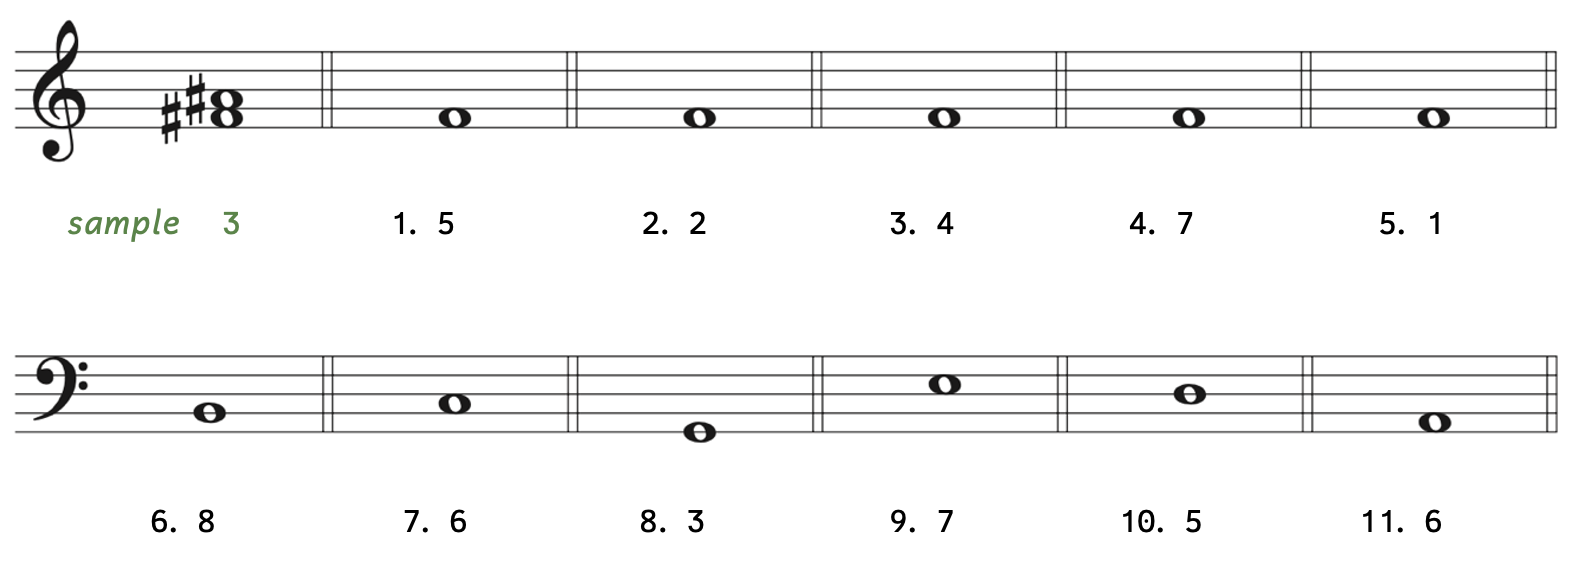 Write harmonic intervals above the given notes using whole notes. Add sharps to both notes. 1 through 5 are in treble clef. 1- fifth above F. 2 - second above F. 3 - fourth above F. 4 - seventh above F. 5 - unison with F. Numbers 6 through 11 are in bass clef. 6 - Octave above B. 7 - Sixth above C. 8 - Third above G. 9 - Seventh above E. 10 - Fifth above D. 11 - Sixth above A. Numbers 12 through 14 are in alto clef. 12 - Second above A. 13 - Seventh above B. 14 - Unison with E. Last 3 are in tenor clef. 15 - Octave above E. 16 - Fifth above B. 17 - Fourth above A.